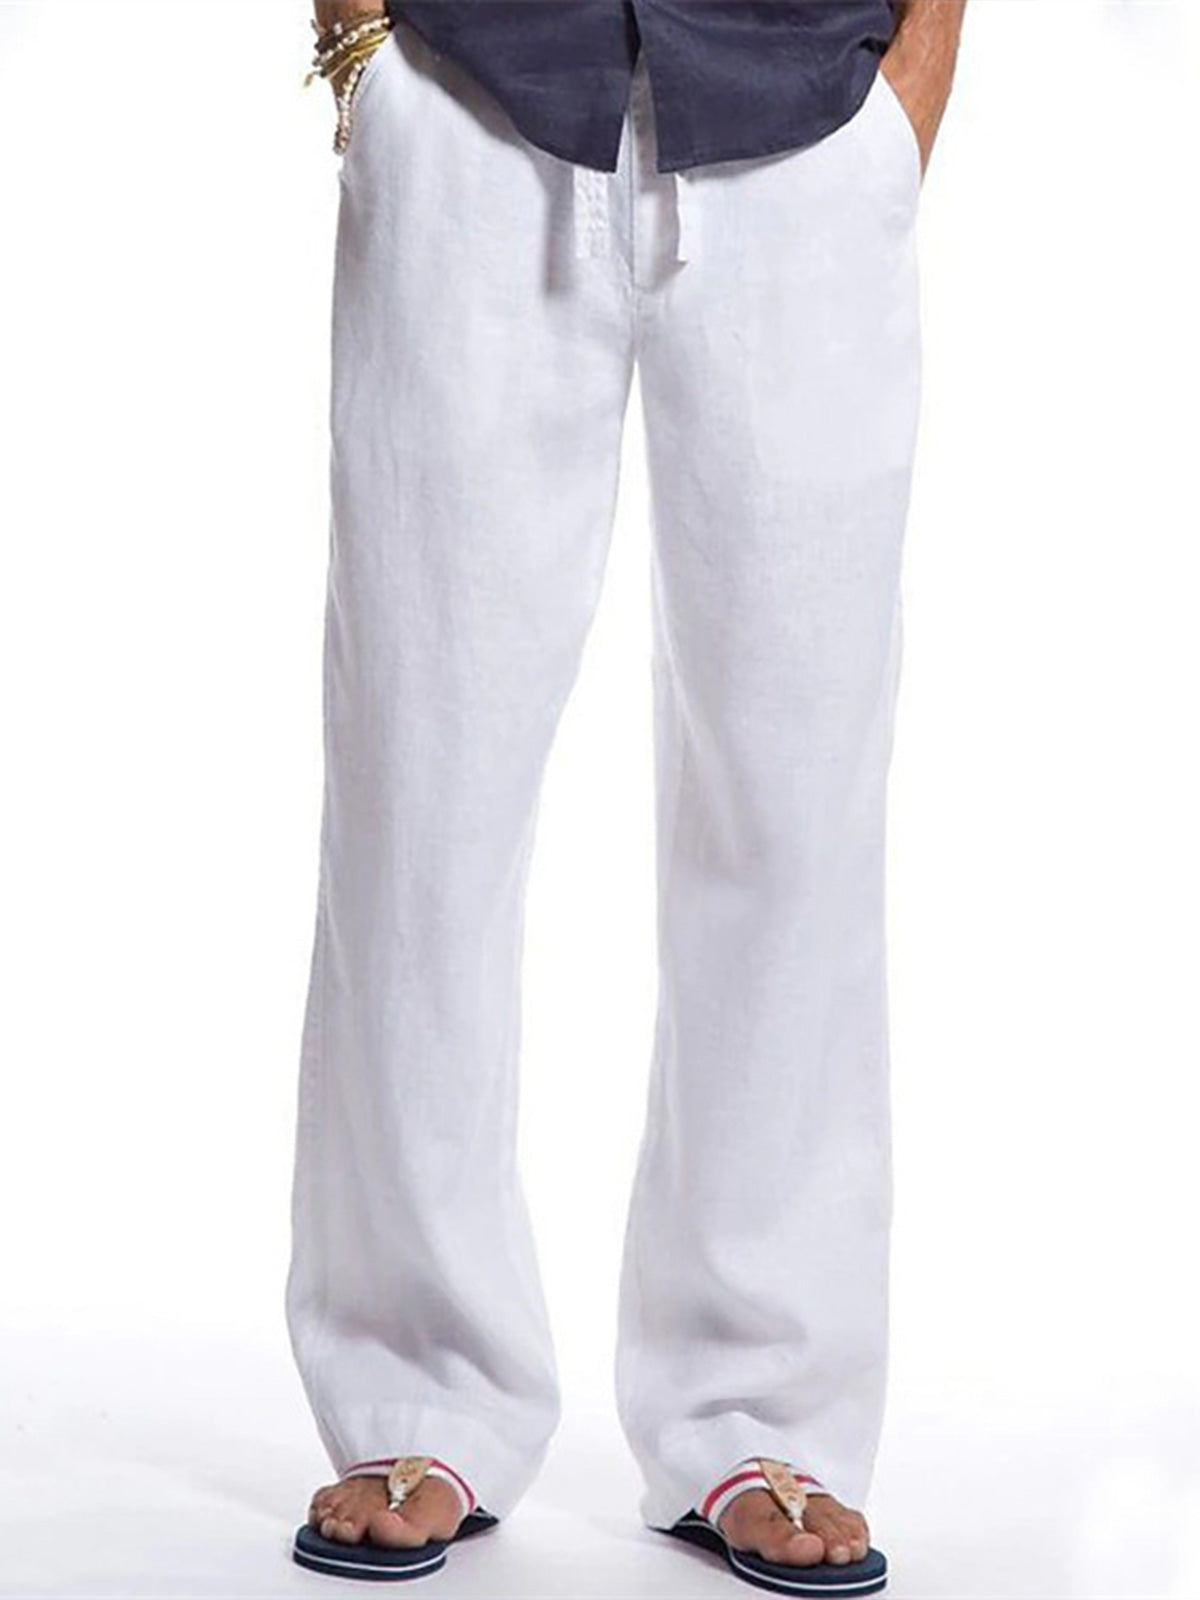 Men's cotton and linen solid color loose casual drawstring straight trousers